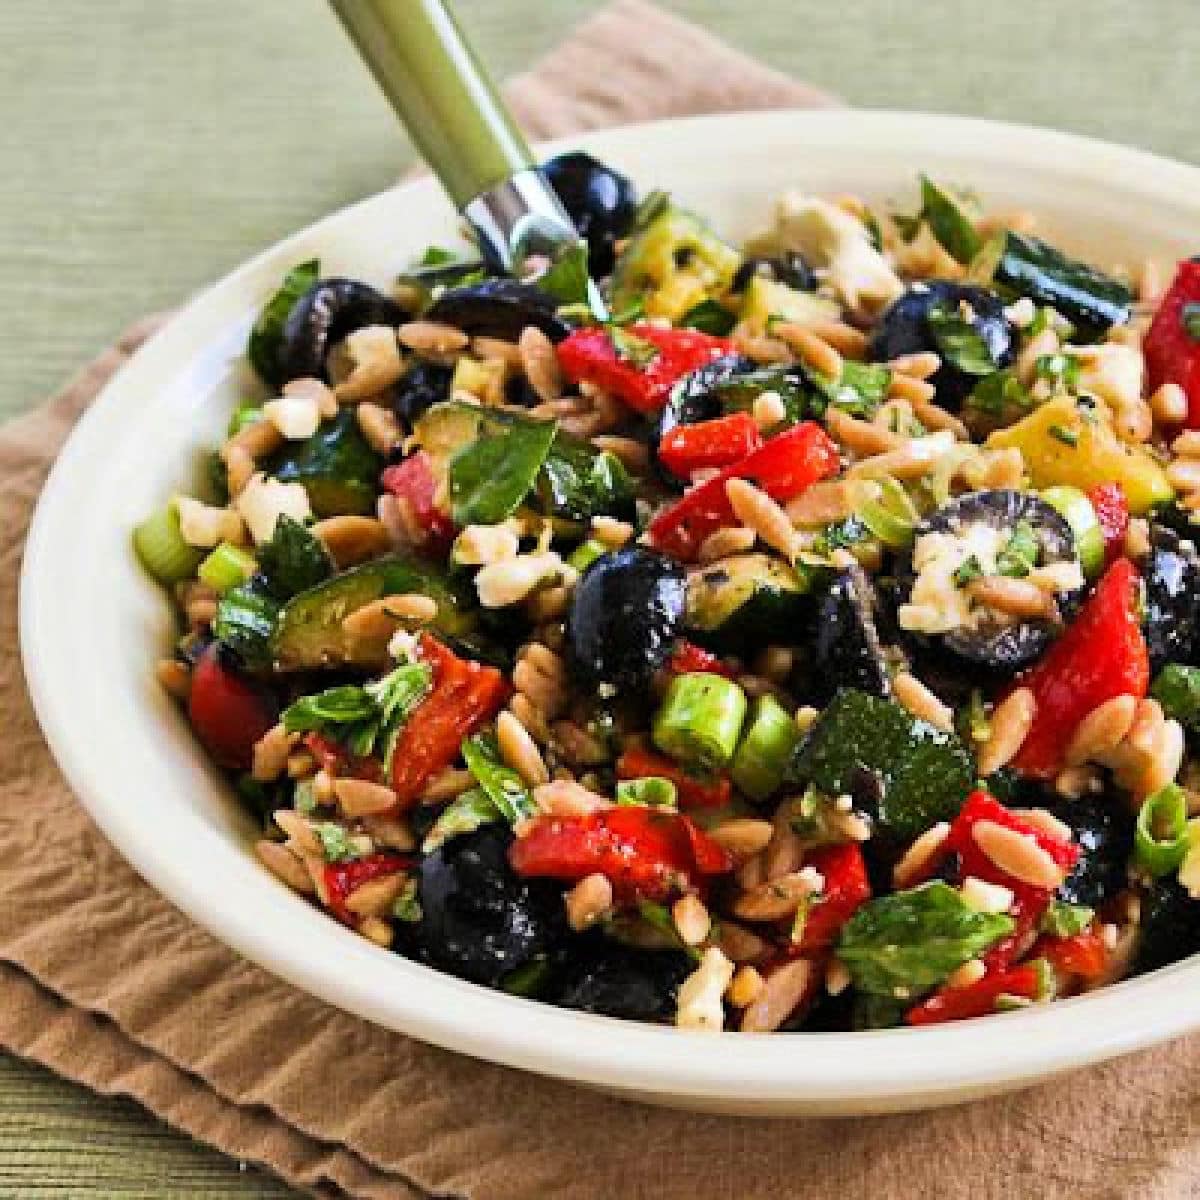 Grilled Vegetable Salad with Feta and Orzo shown in serving bowl.